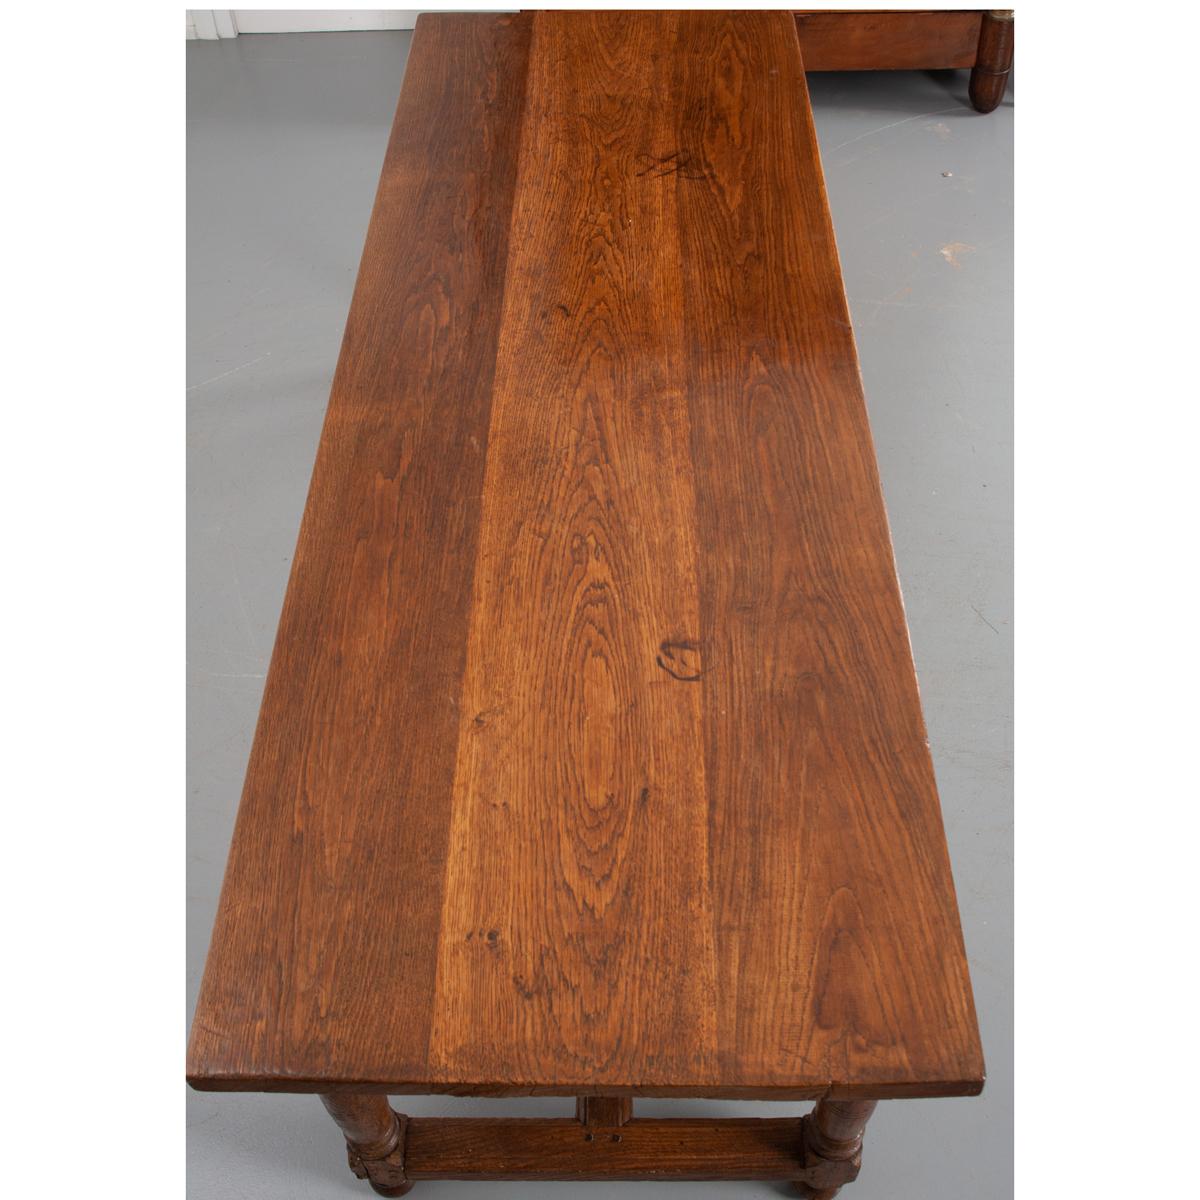 This handsome oak table features a three plank solid top. A simple apron is outfitted with a single, deep drawer with a turned wood knob. The whole rests on four turned legs connected with a H-form stretcher. The hand pegged, treenail construction